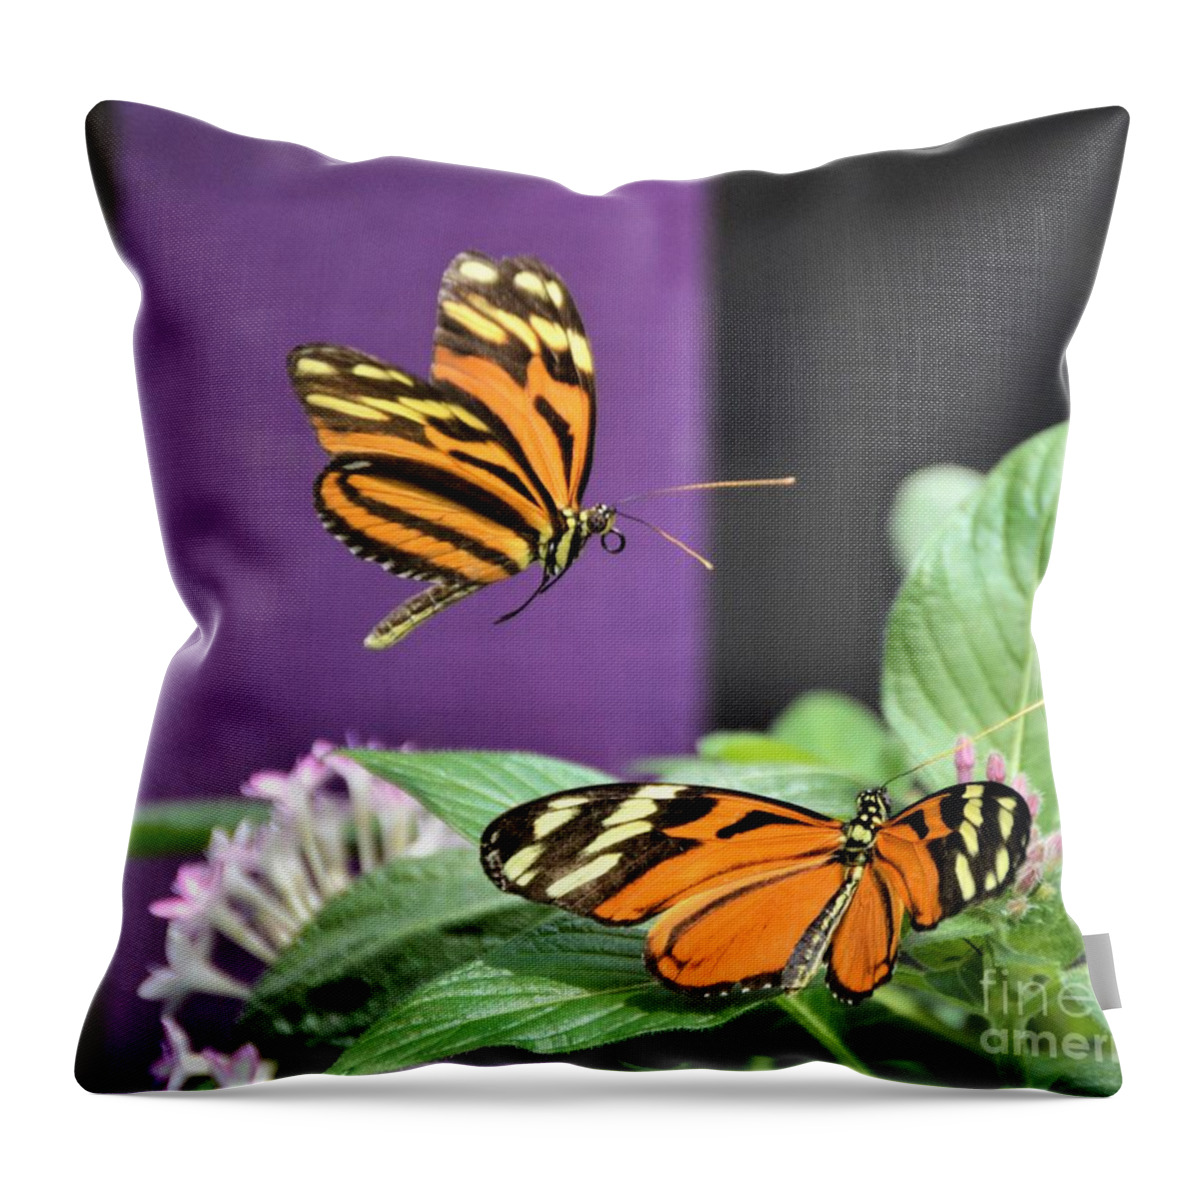 Butterflies Throw Pillow featuring the photograph Freeze Frame by Kathy Kelly